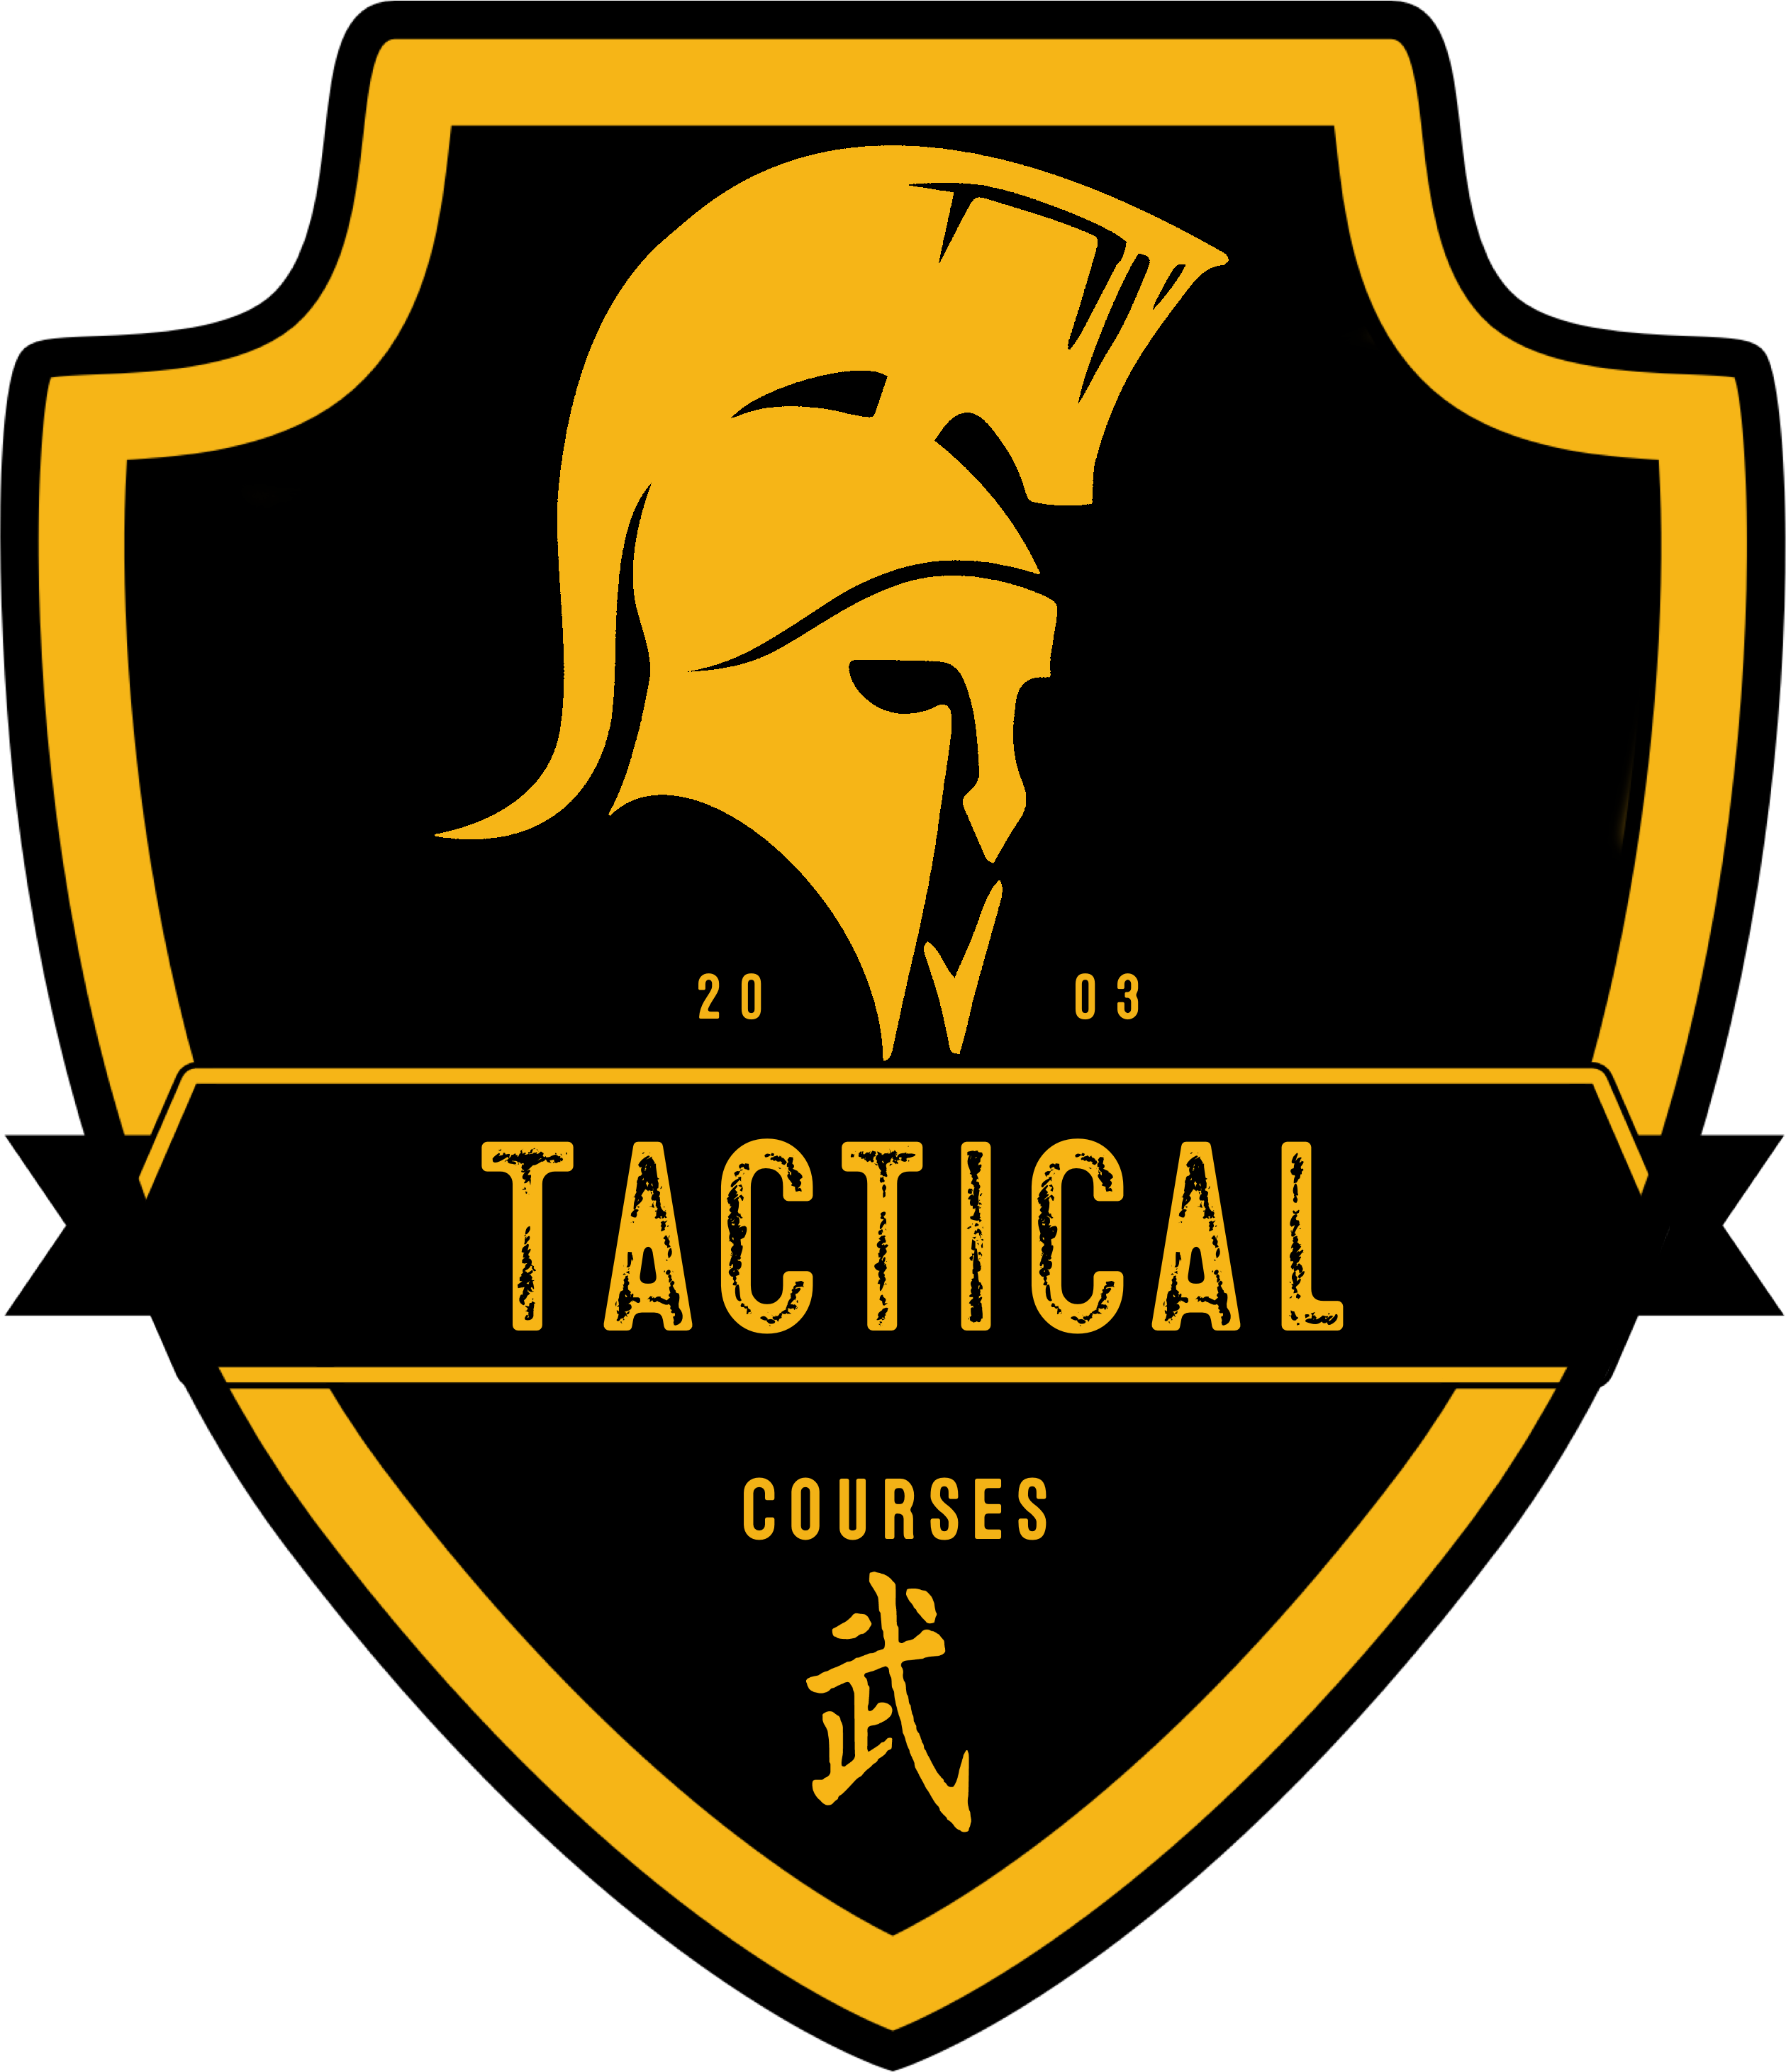 Tactical Courses